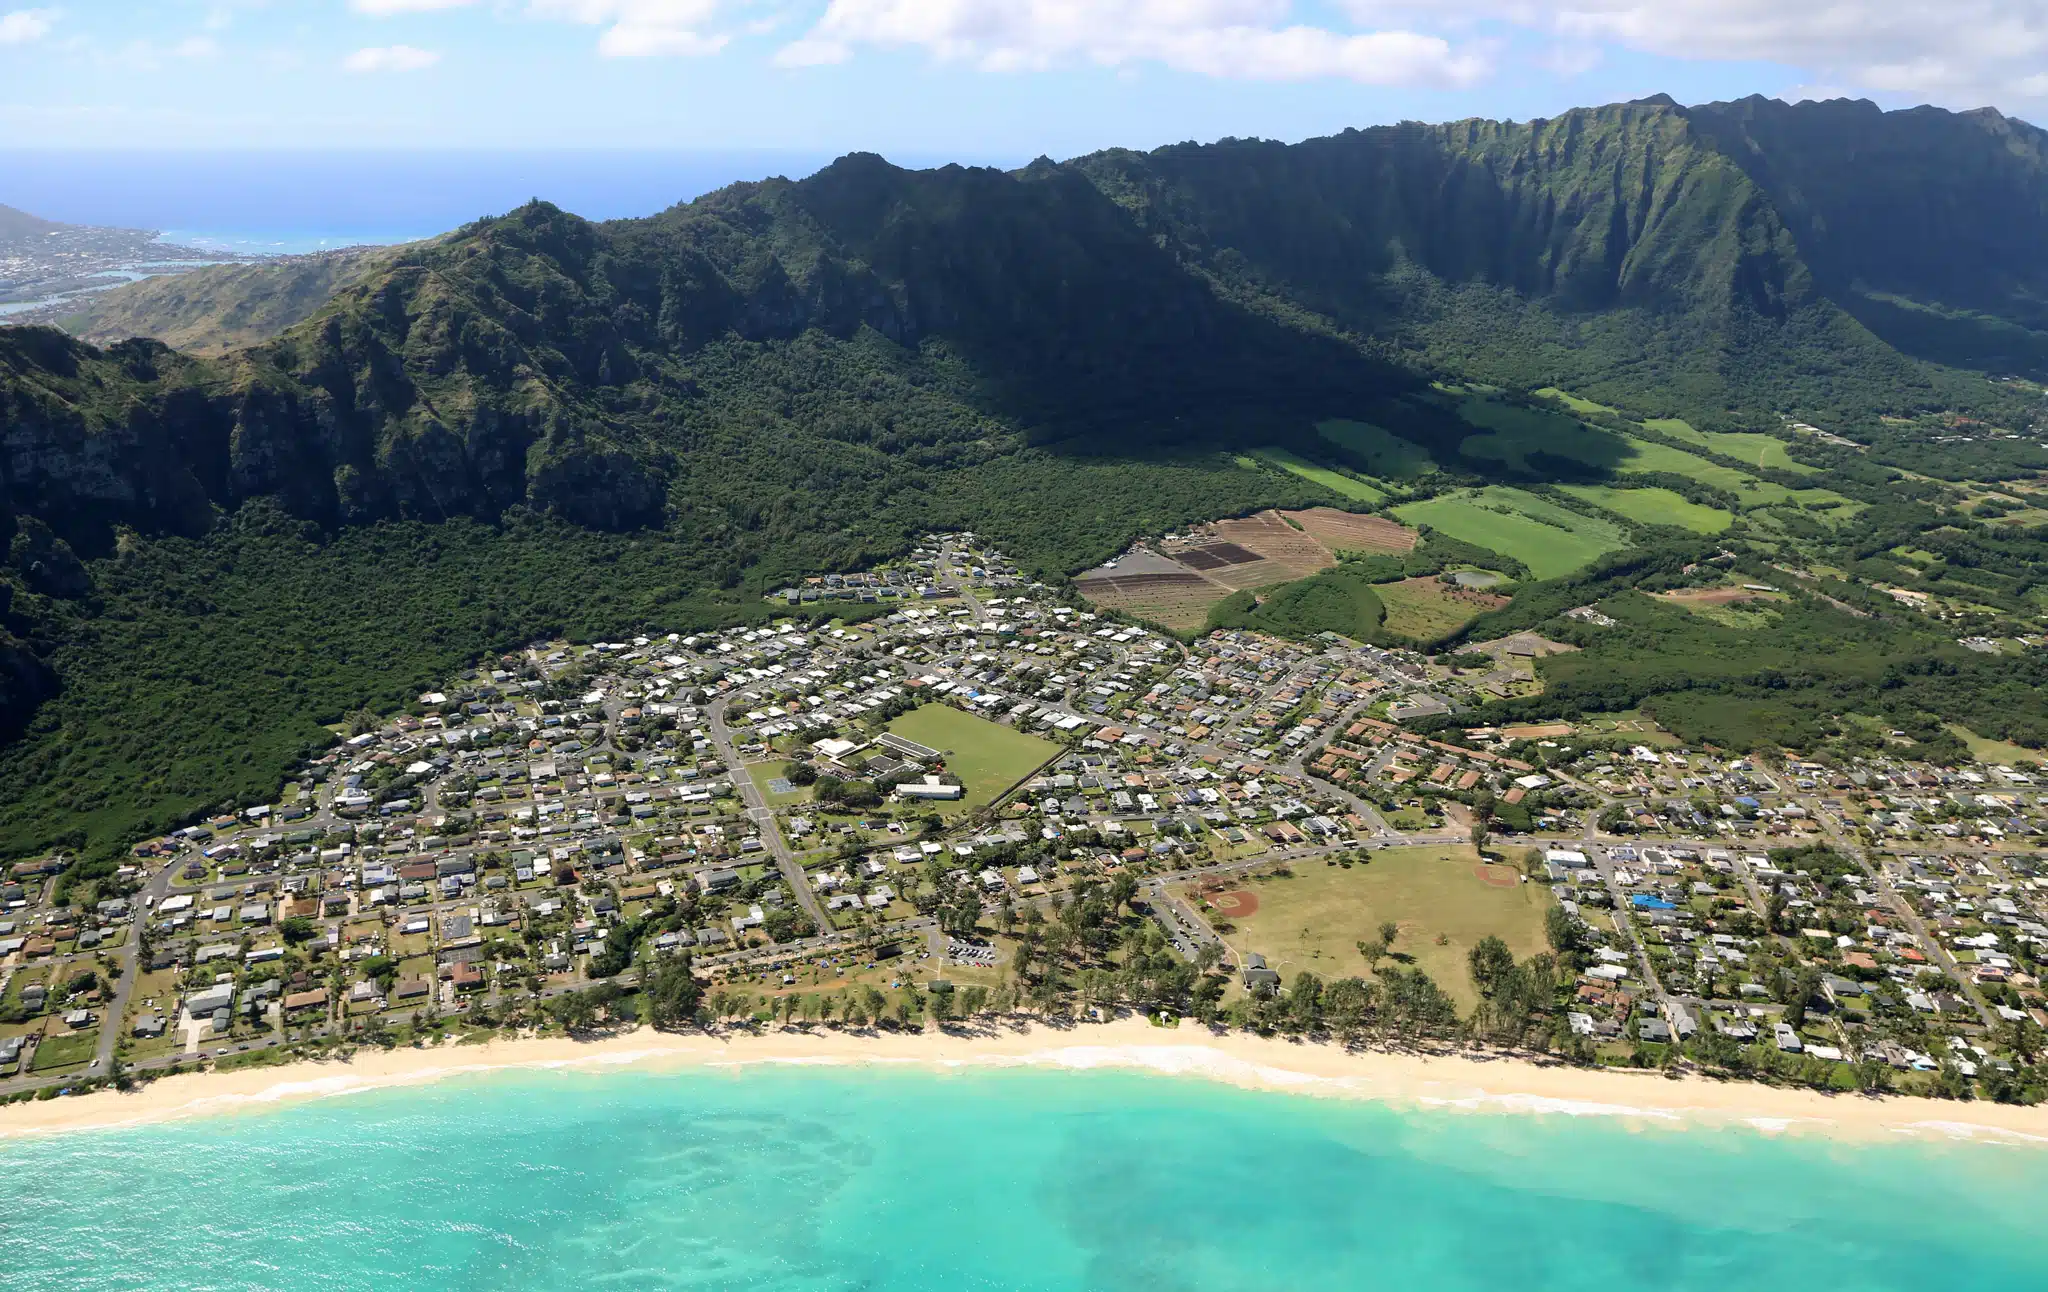 Waimanalo is a Town located in the city of Waimanalo on Oahu, Hawaii